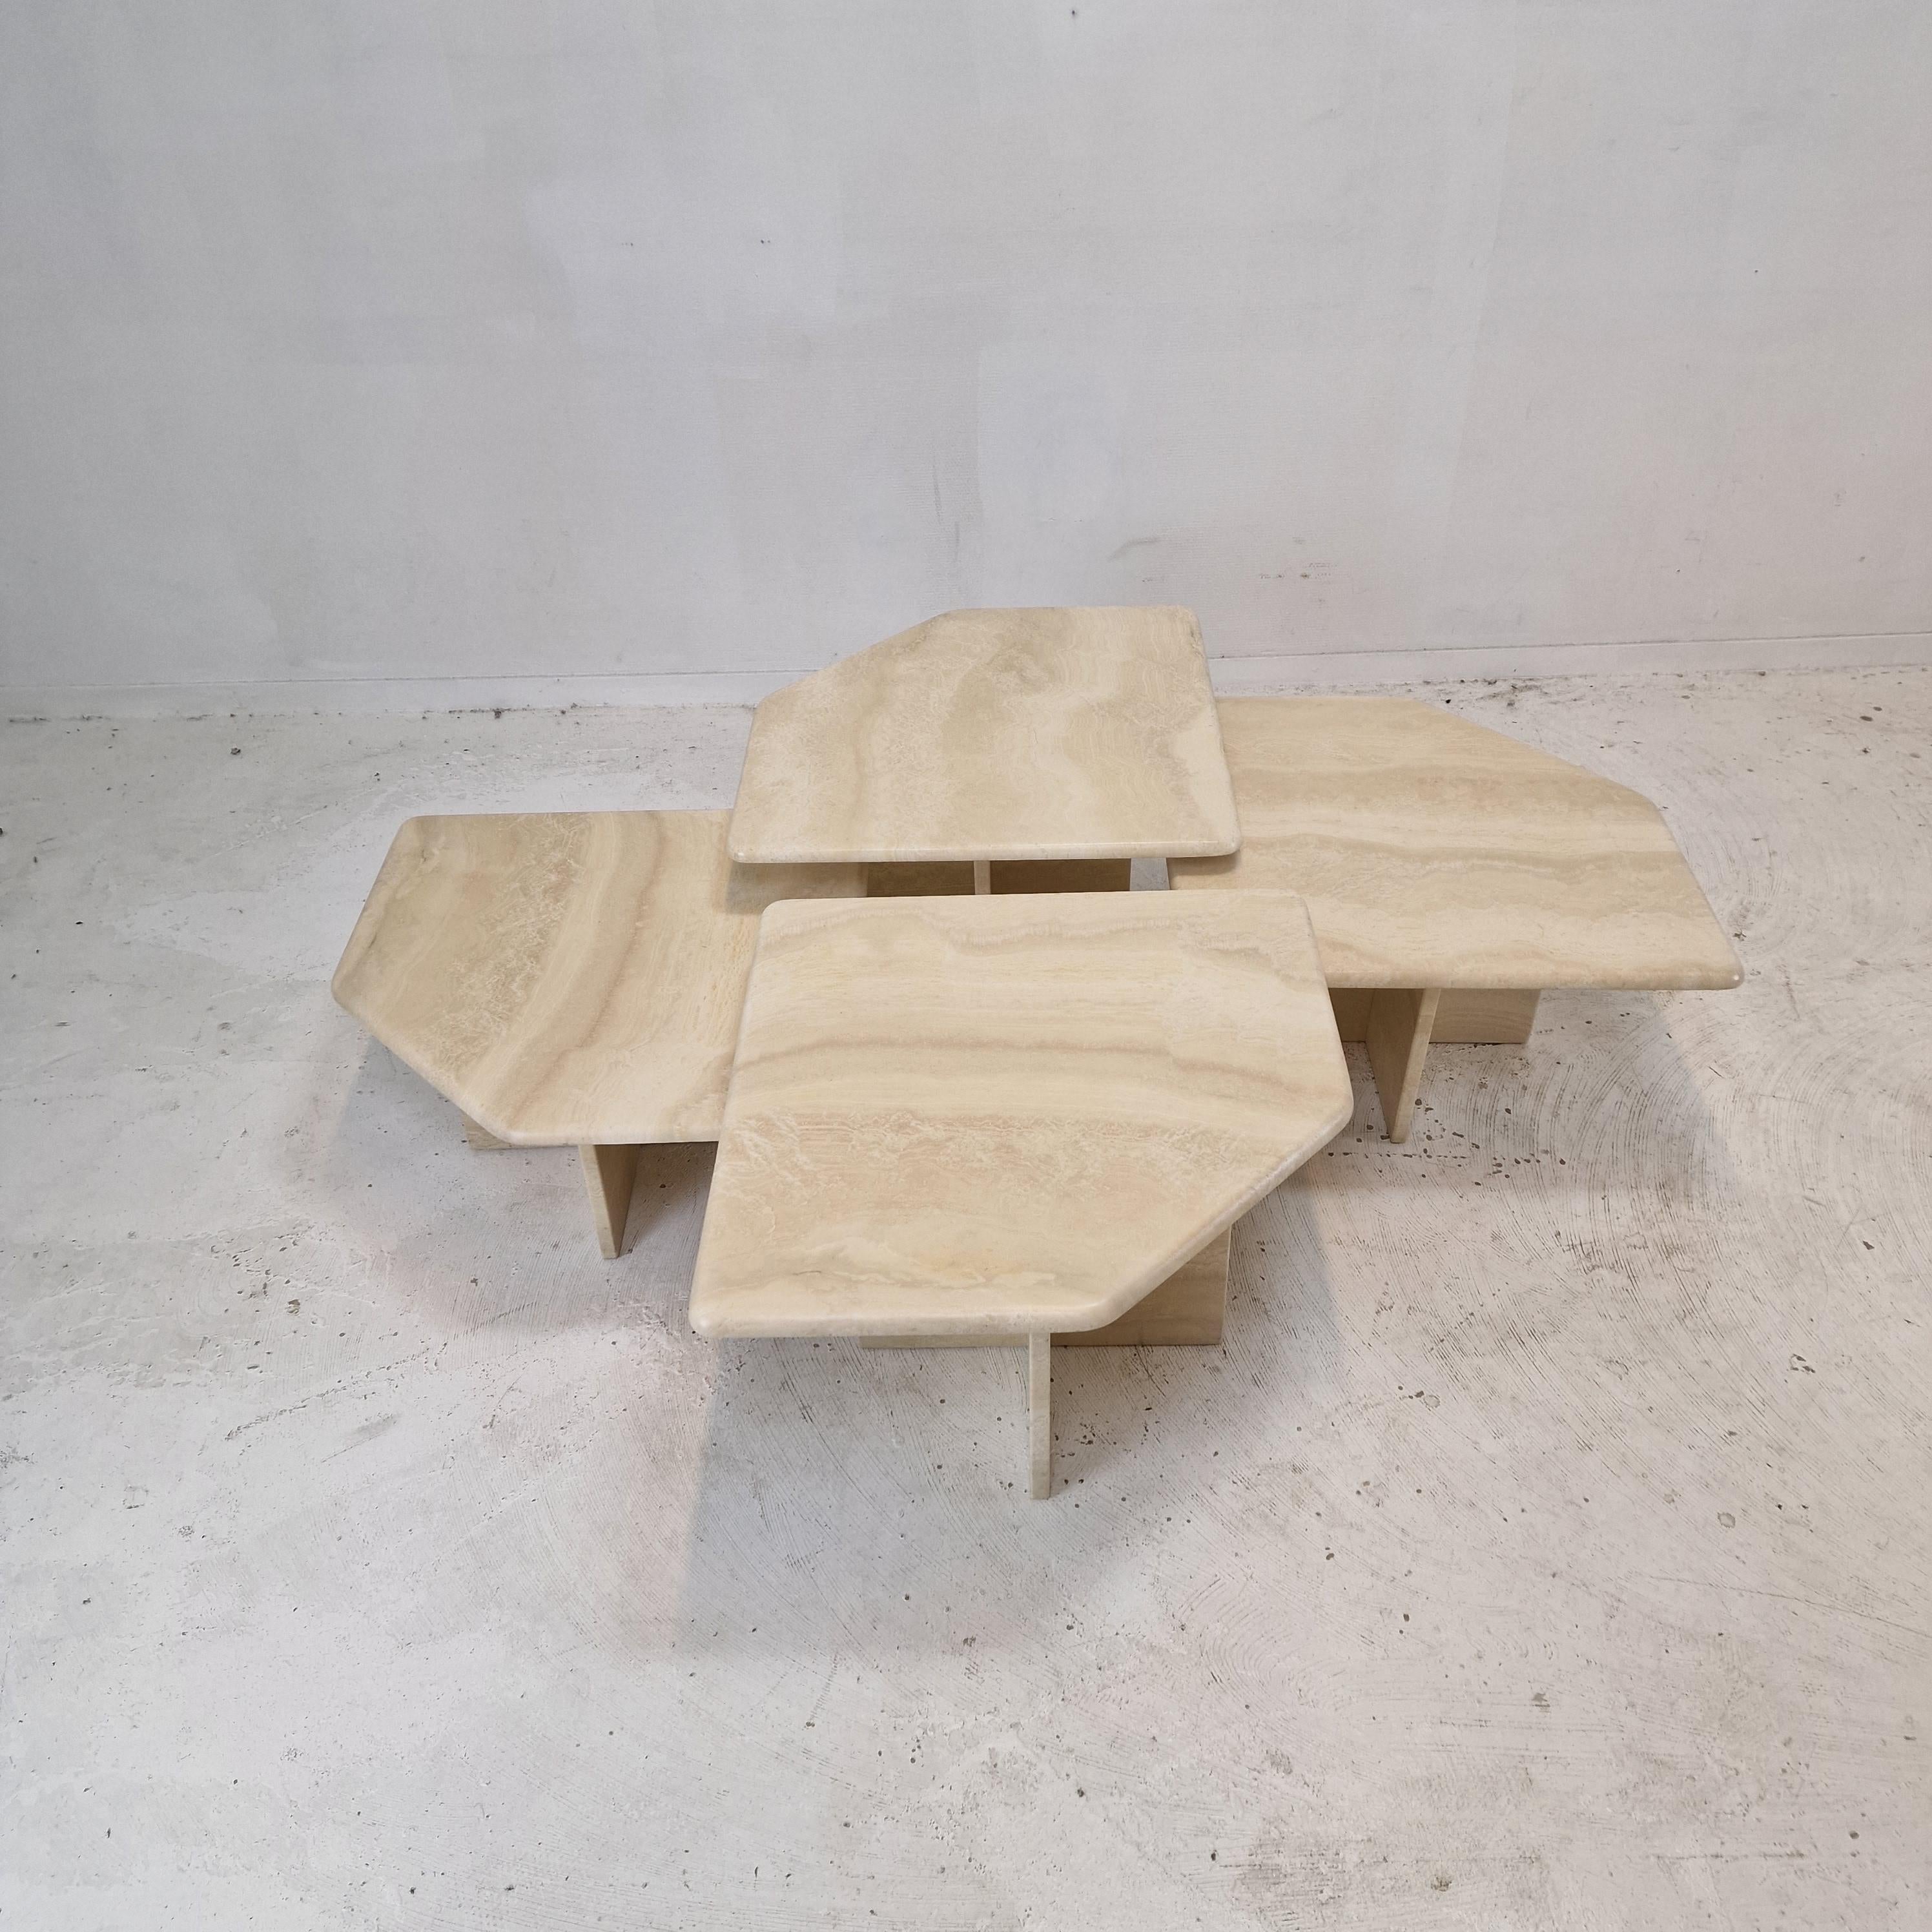 Hand-Crafted Set of 4 Italian Travertine Coffee or Side Tables, 1990s